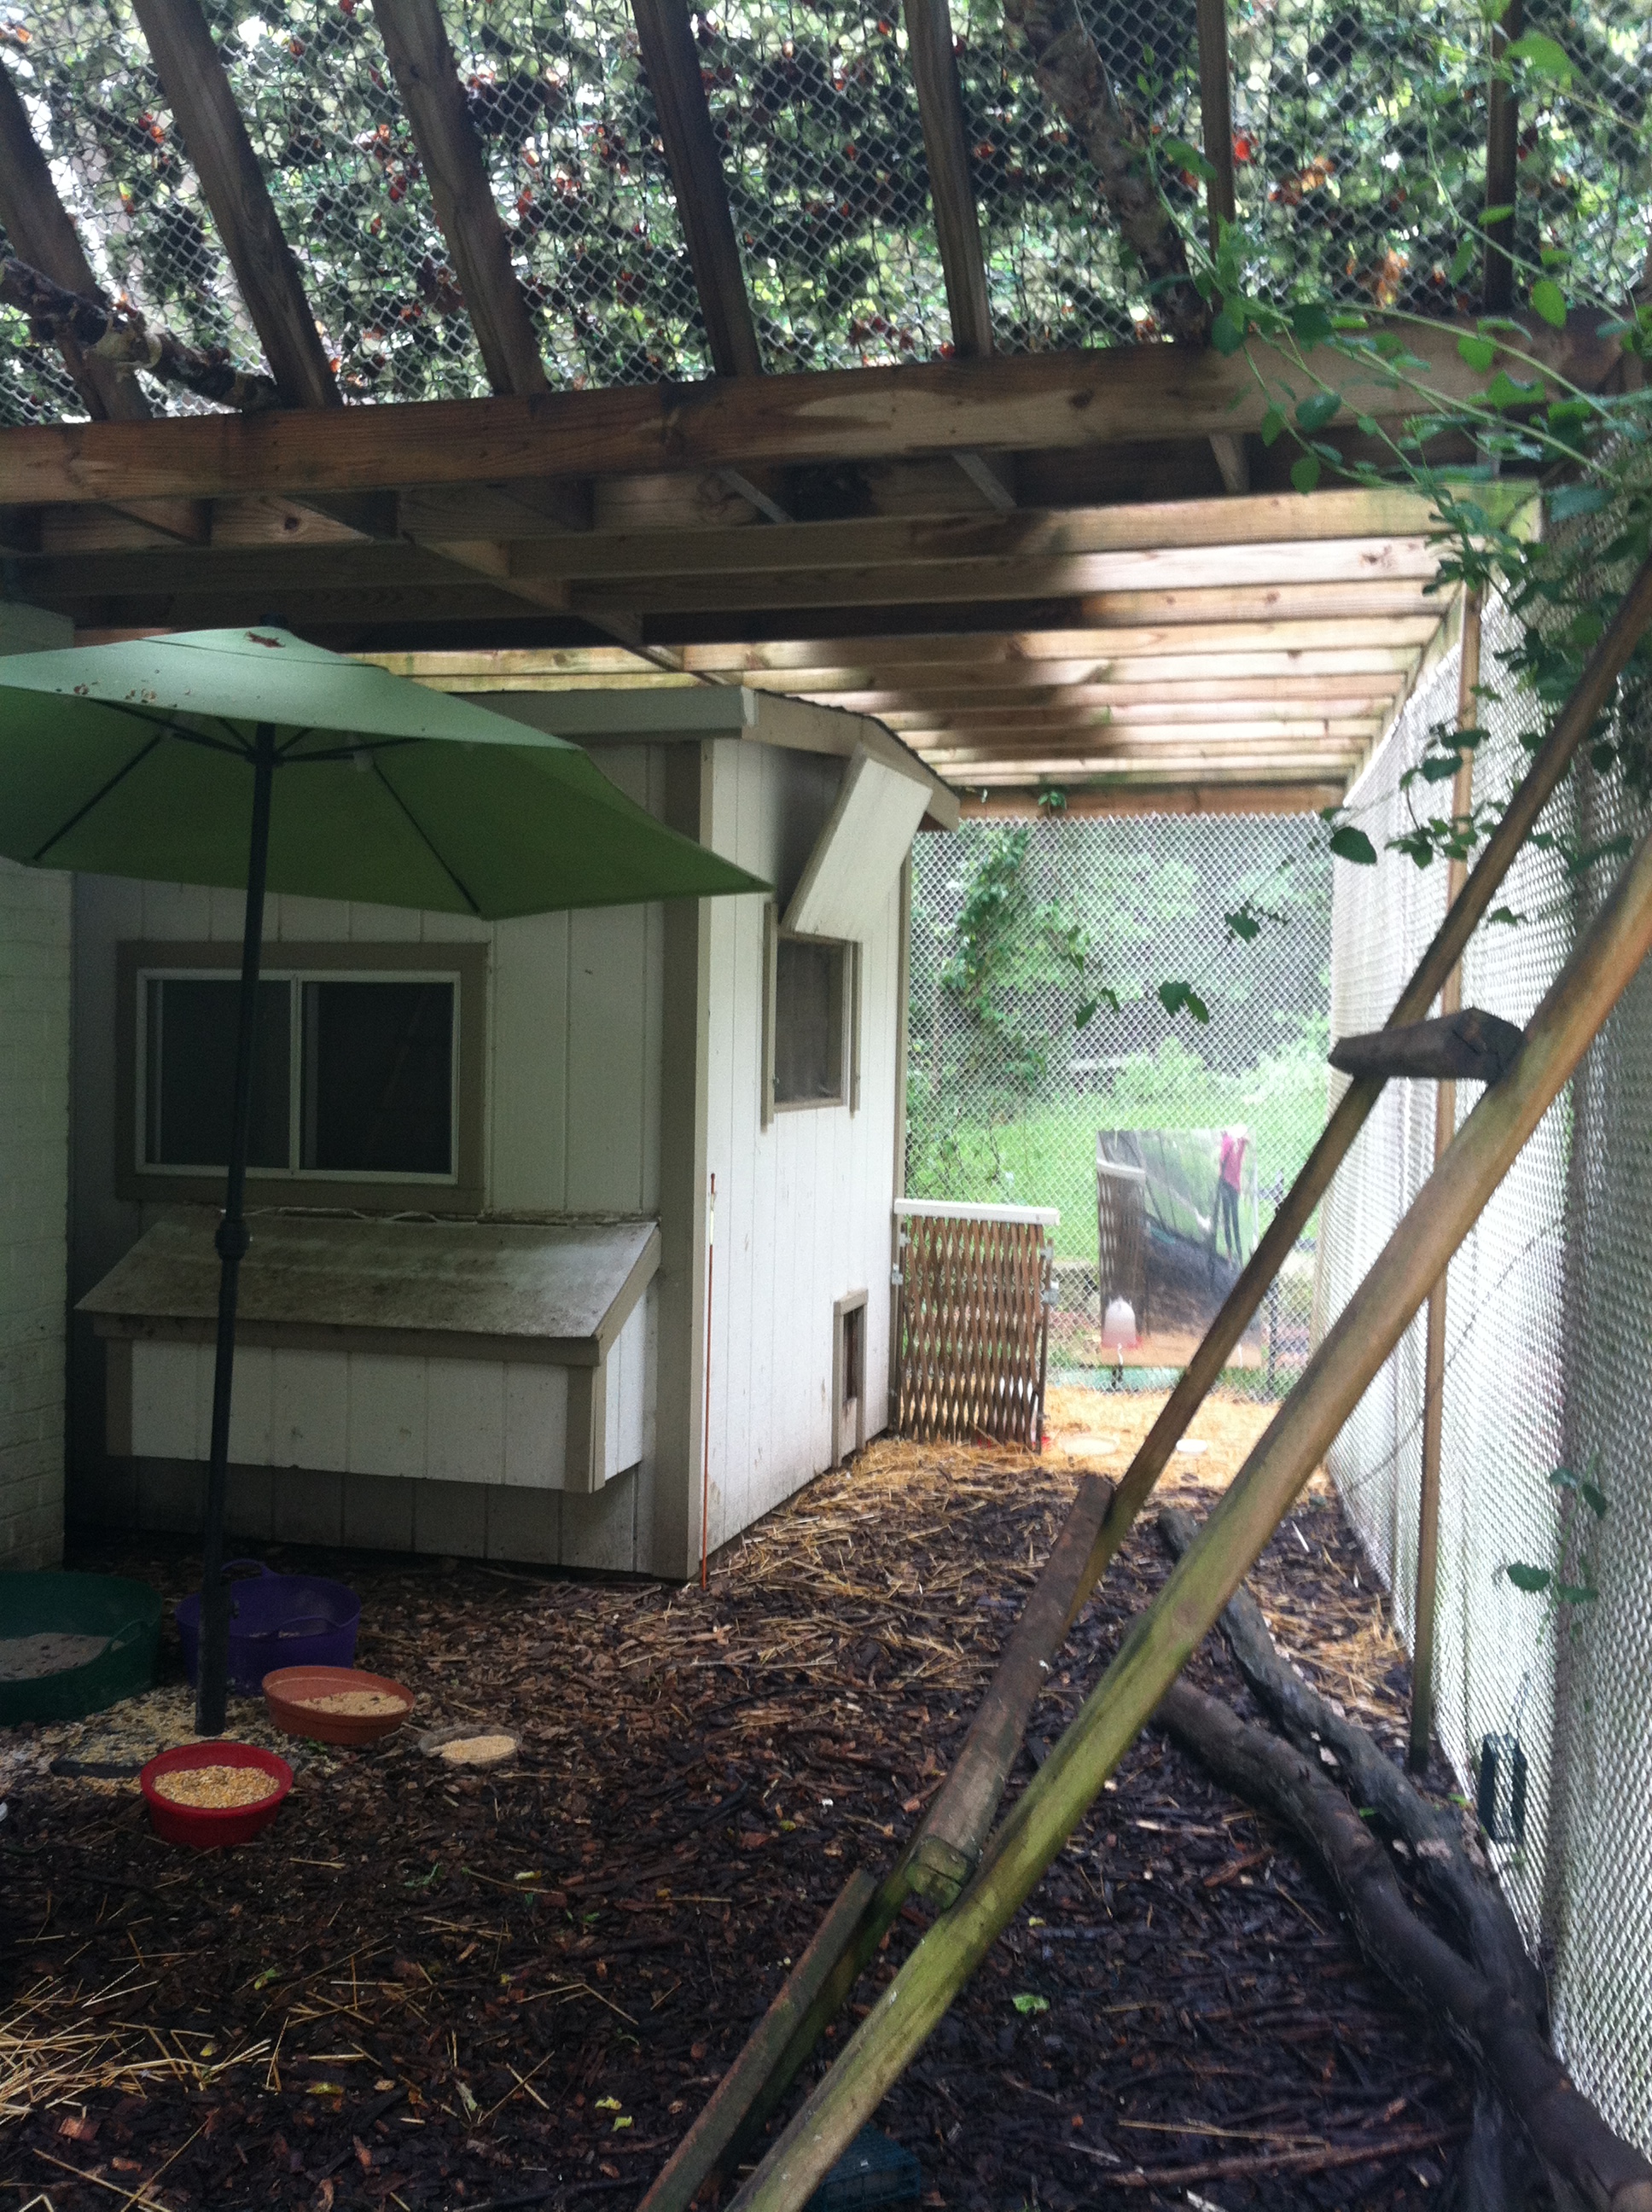 My chicken/peafowl coop.  Added patio umbrella for 2013 rainy season, to protects food bowls etc....